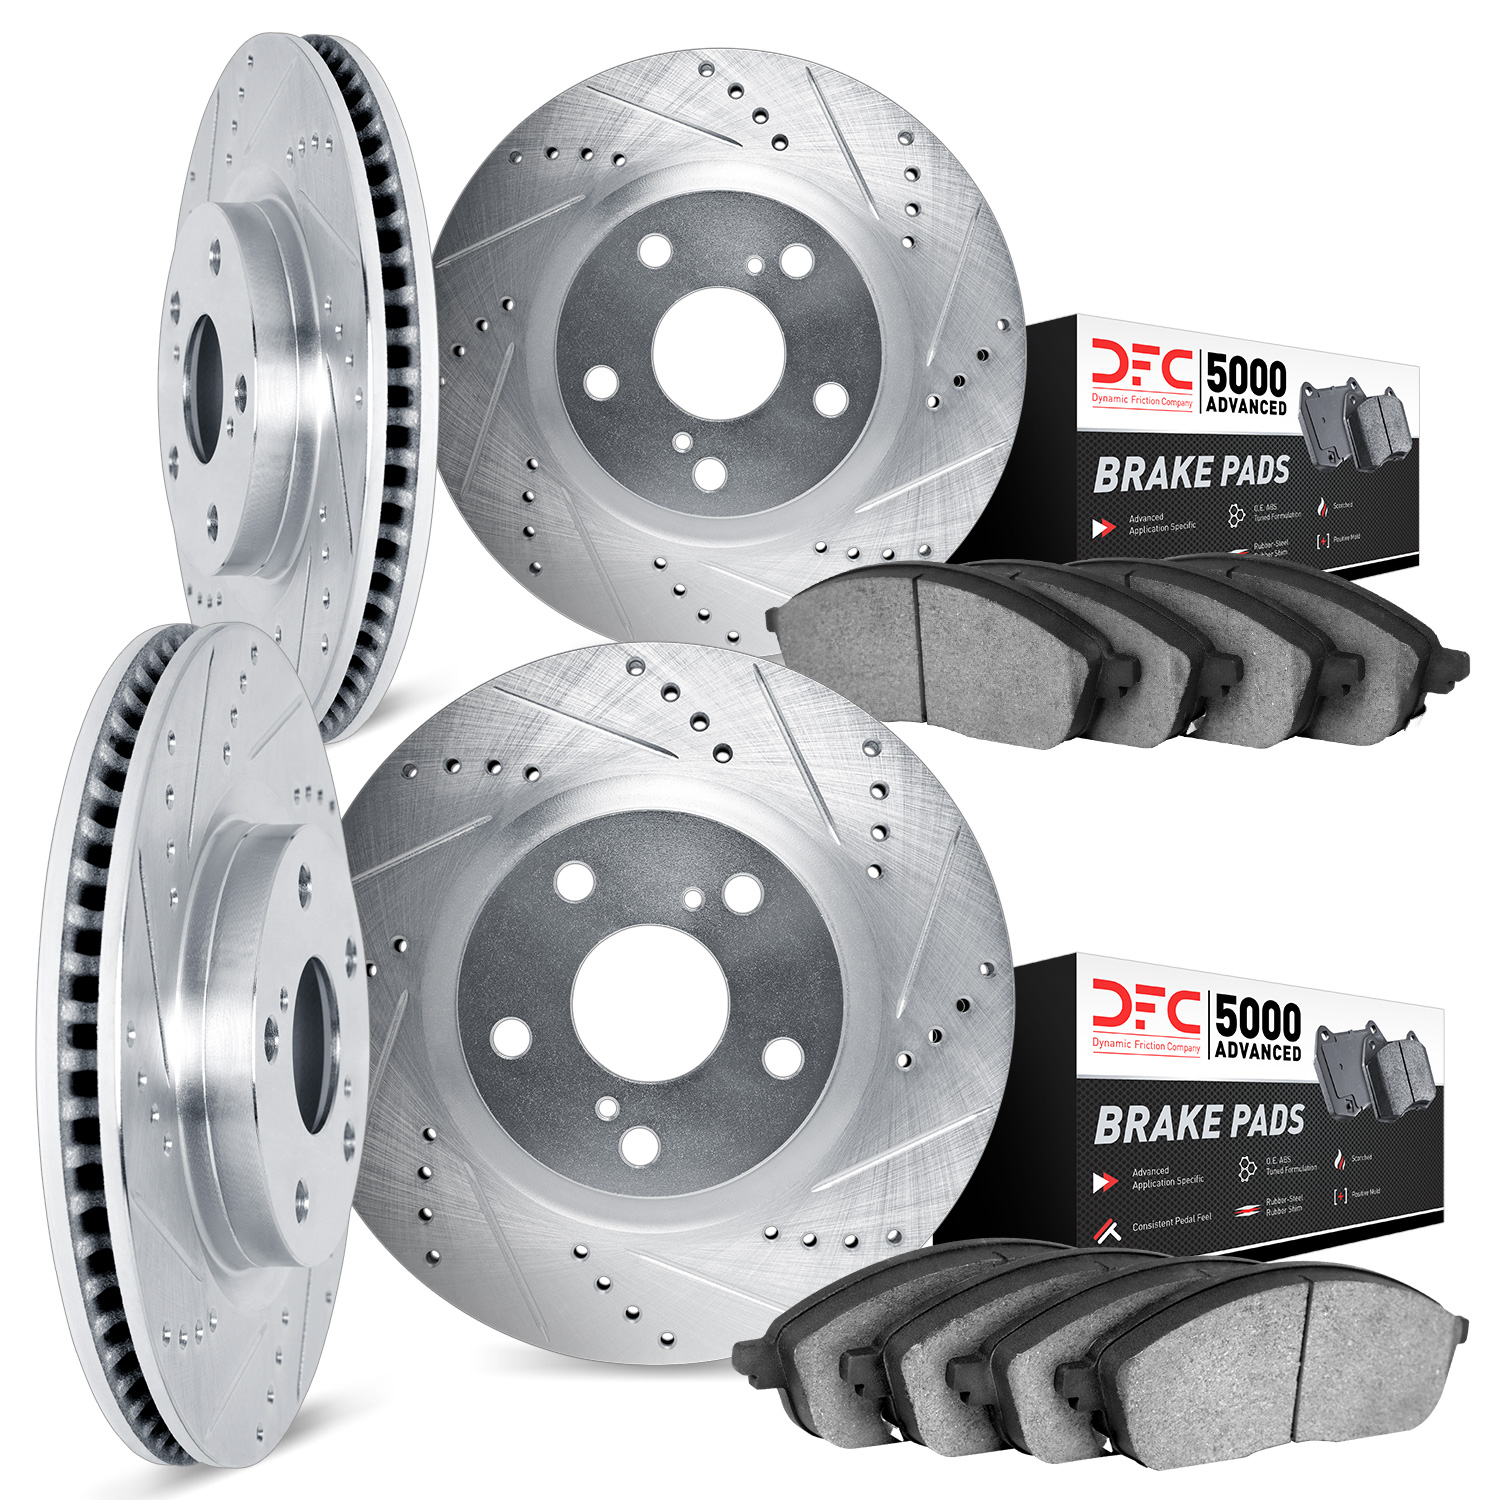 7504-11011 Drilled/Slotted Brake Rotors w/5000 Advanced Brake Pads Kit [Silver], 2014-2017 Land Rover, Position: Front and Rear